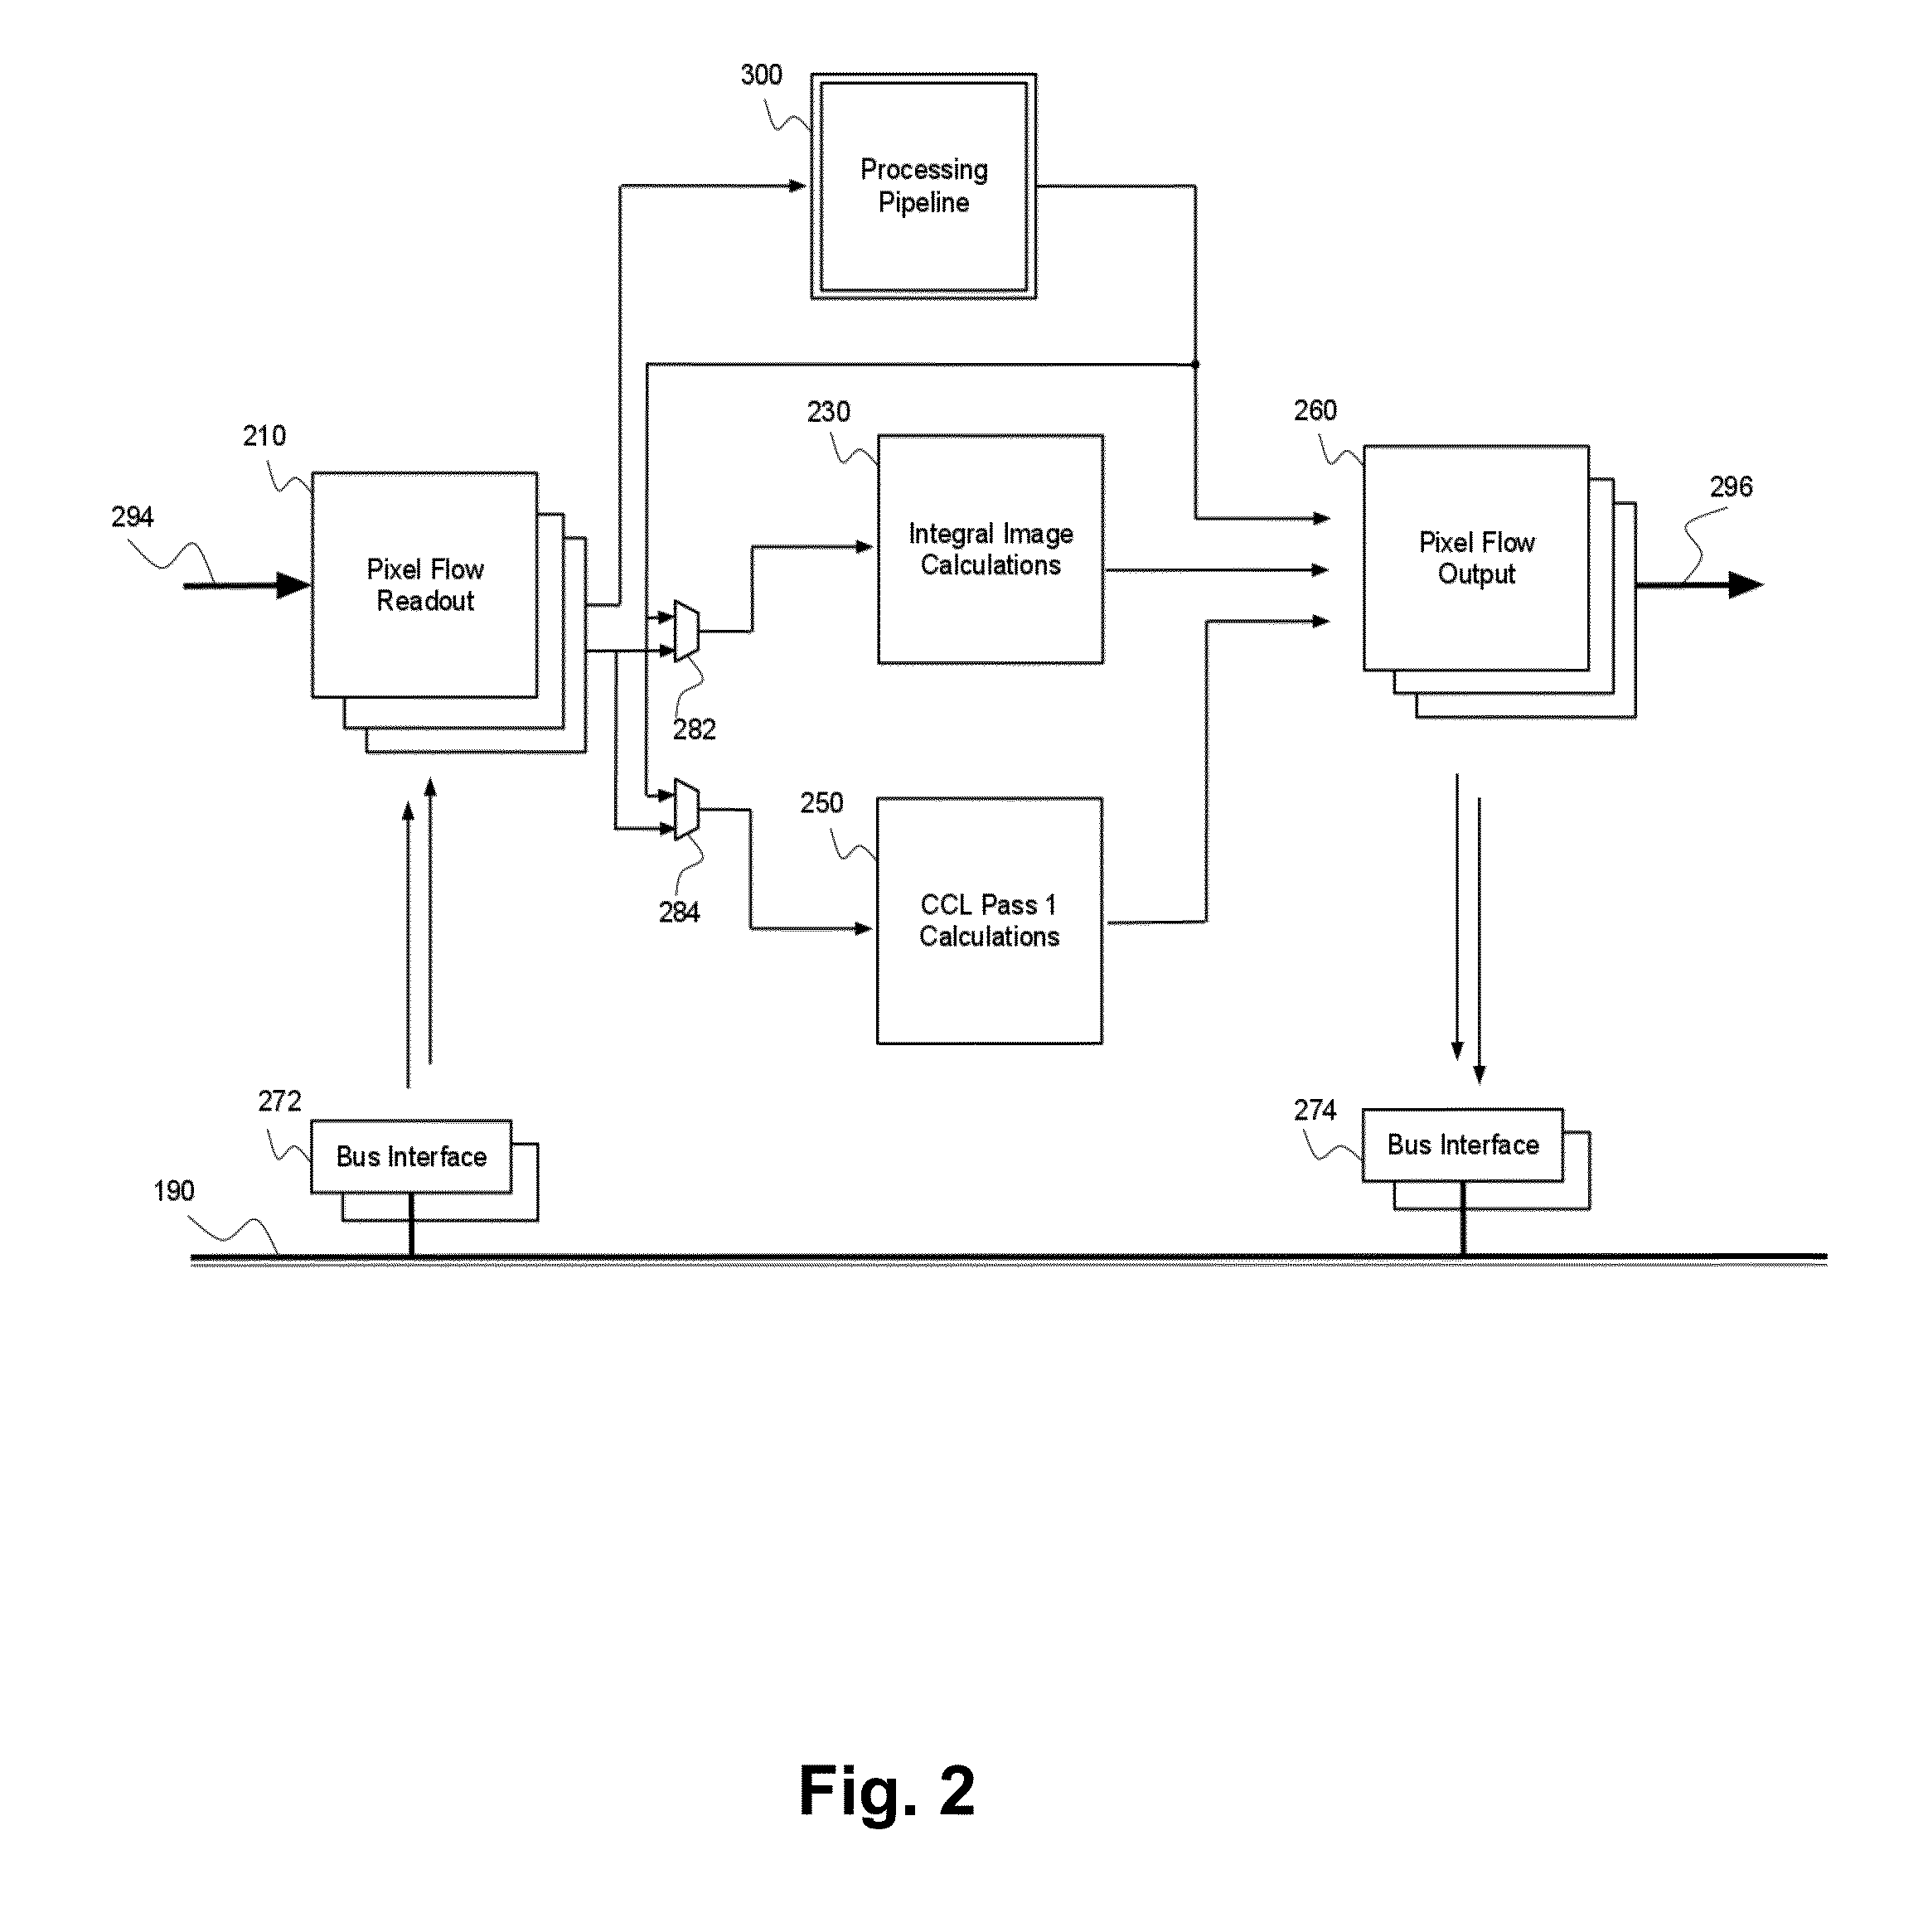 Pixel flow processing apparatus with integrated connected components labeling